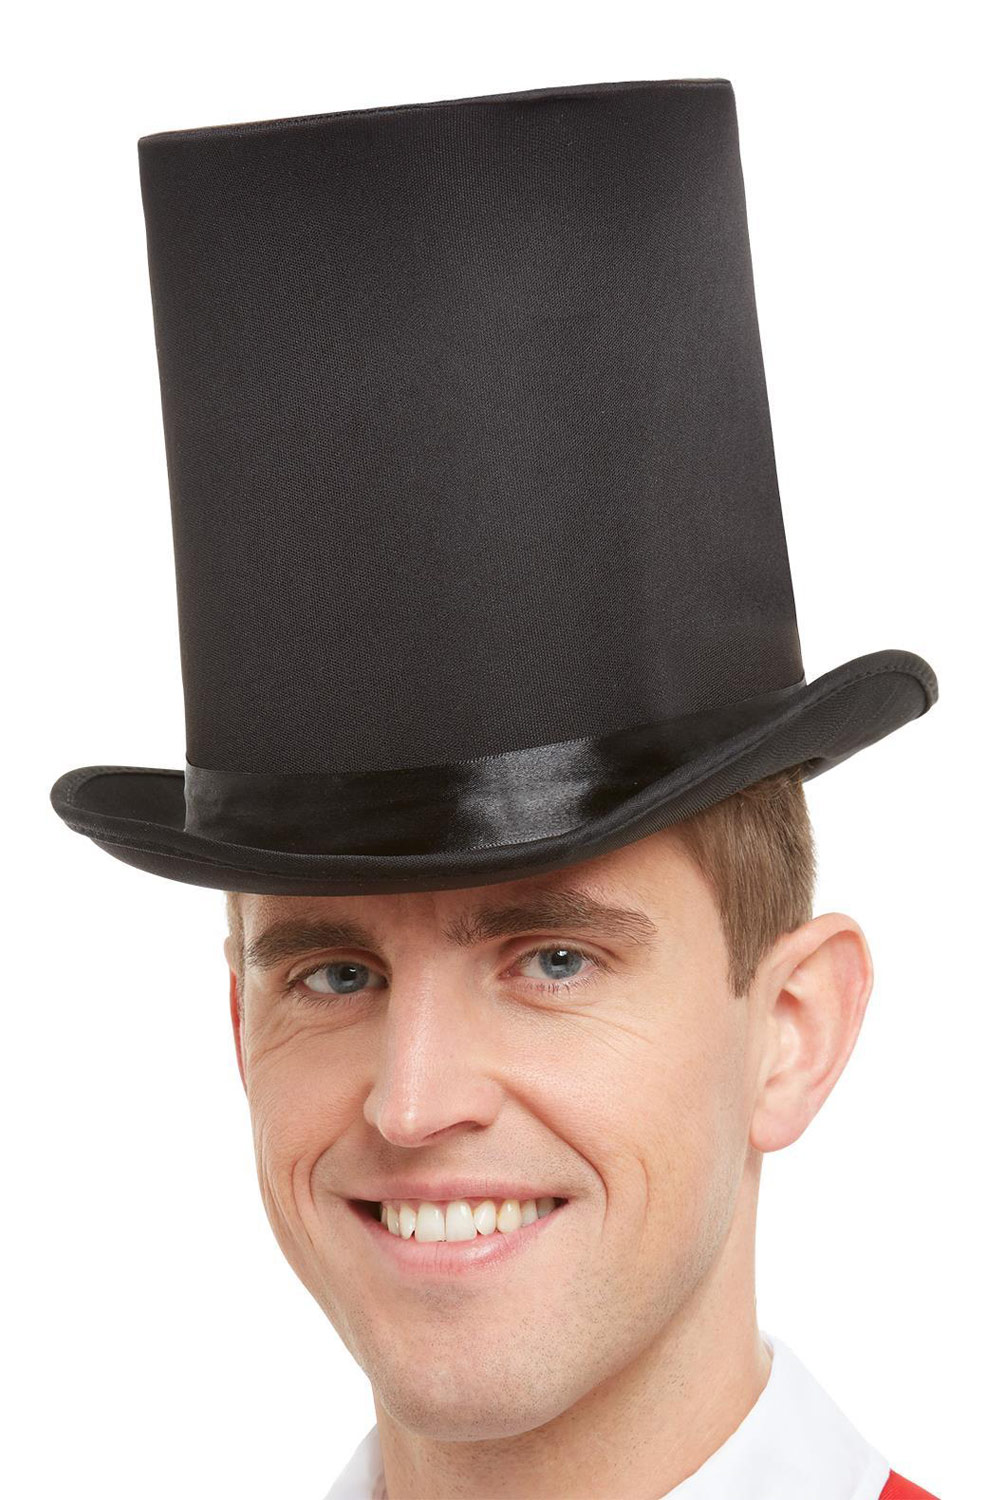 New Adult Deluxe Black Top Hat Topper Victorian Ringmaster Lincoln Fancy Dress 